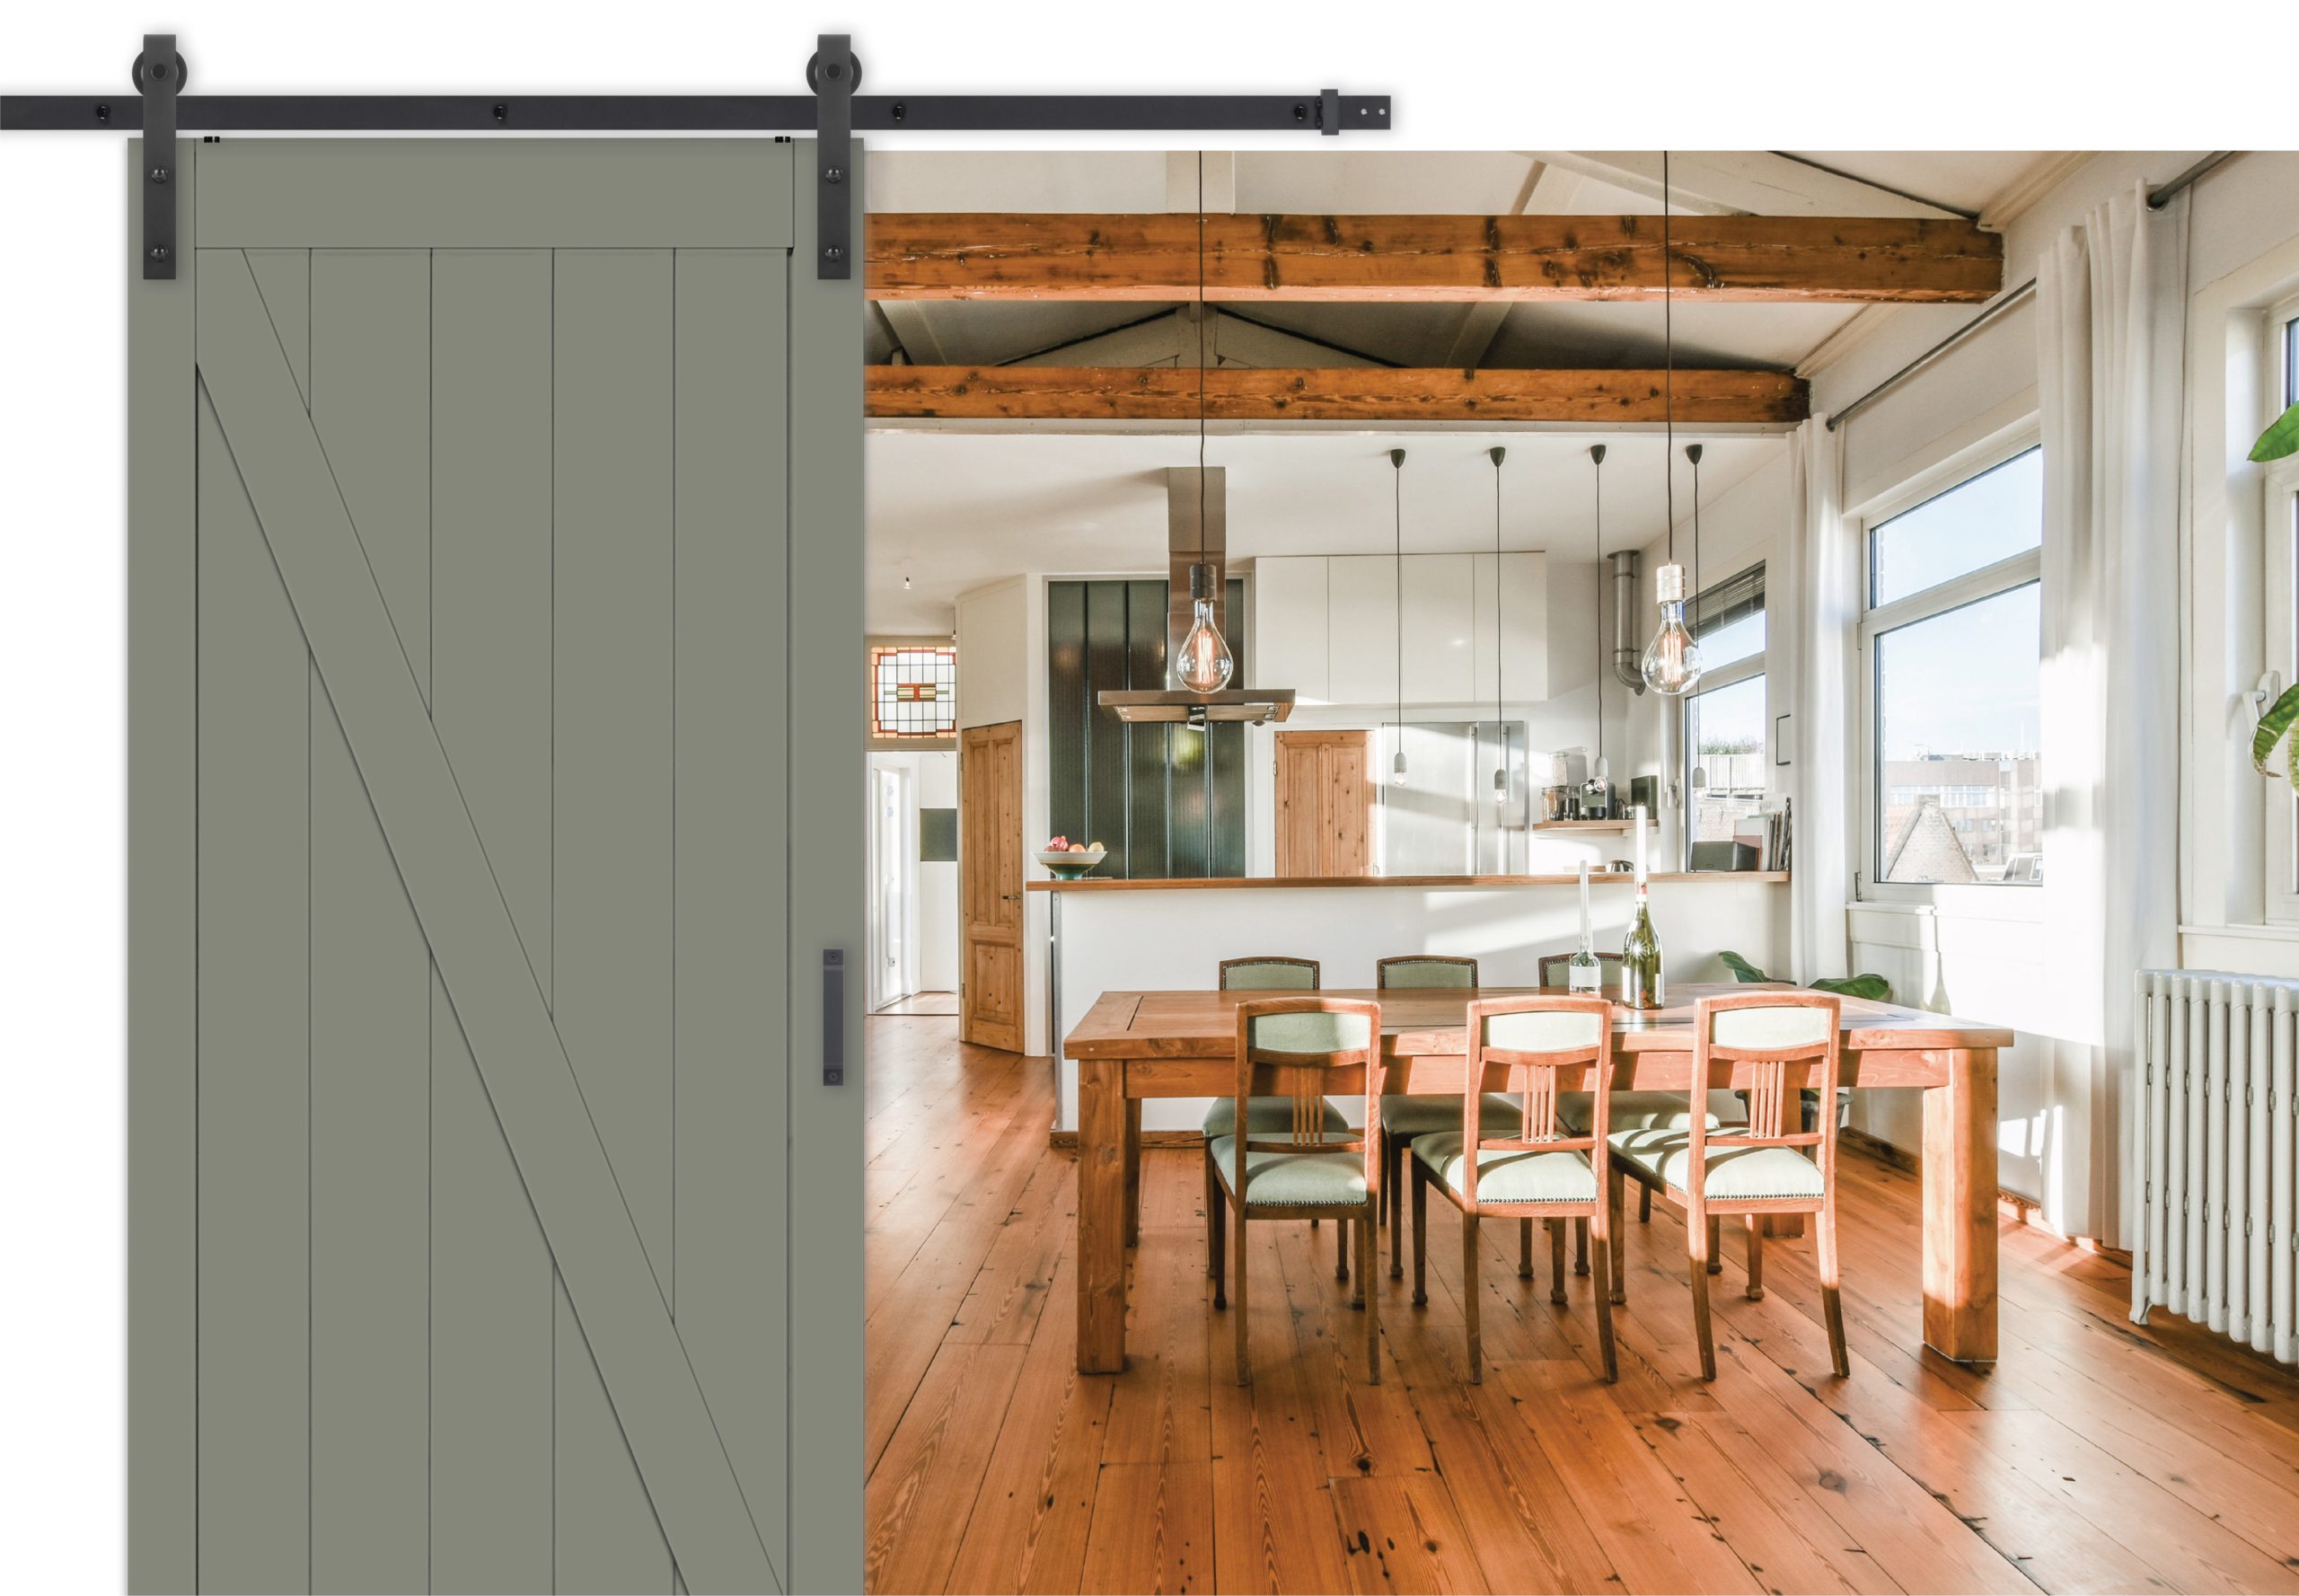 A barn door painted with Evergreen Fog 9130 by Sherwin Williams, in a dining room with an organic finish and a mix of green.